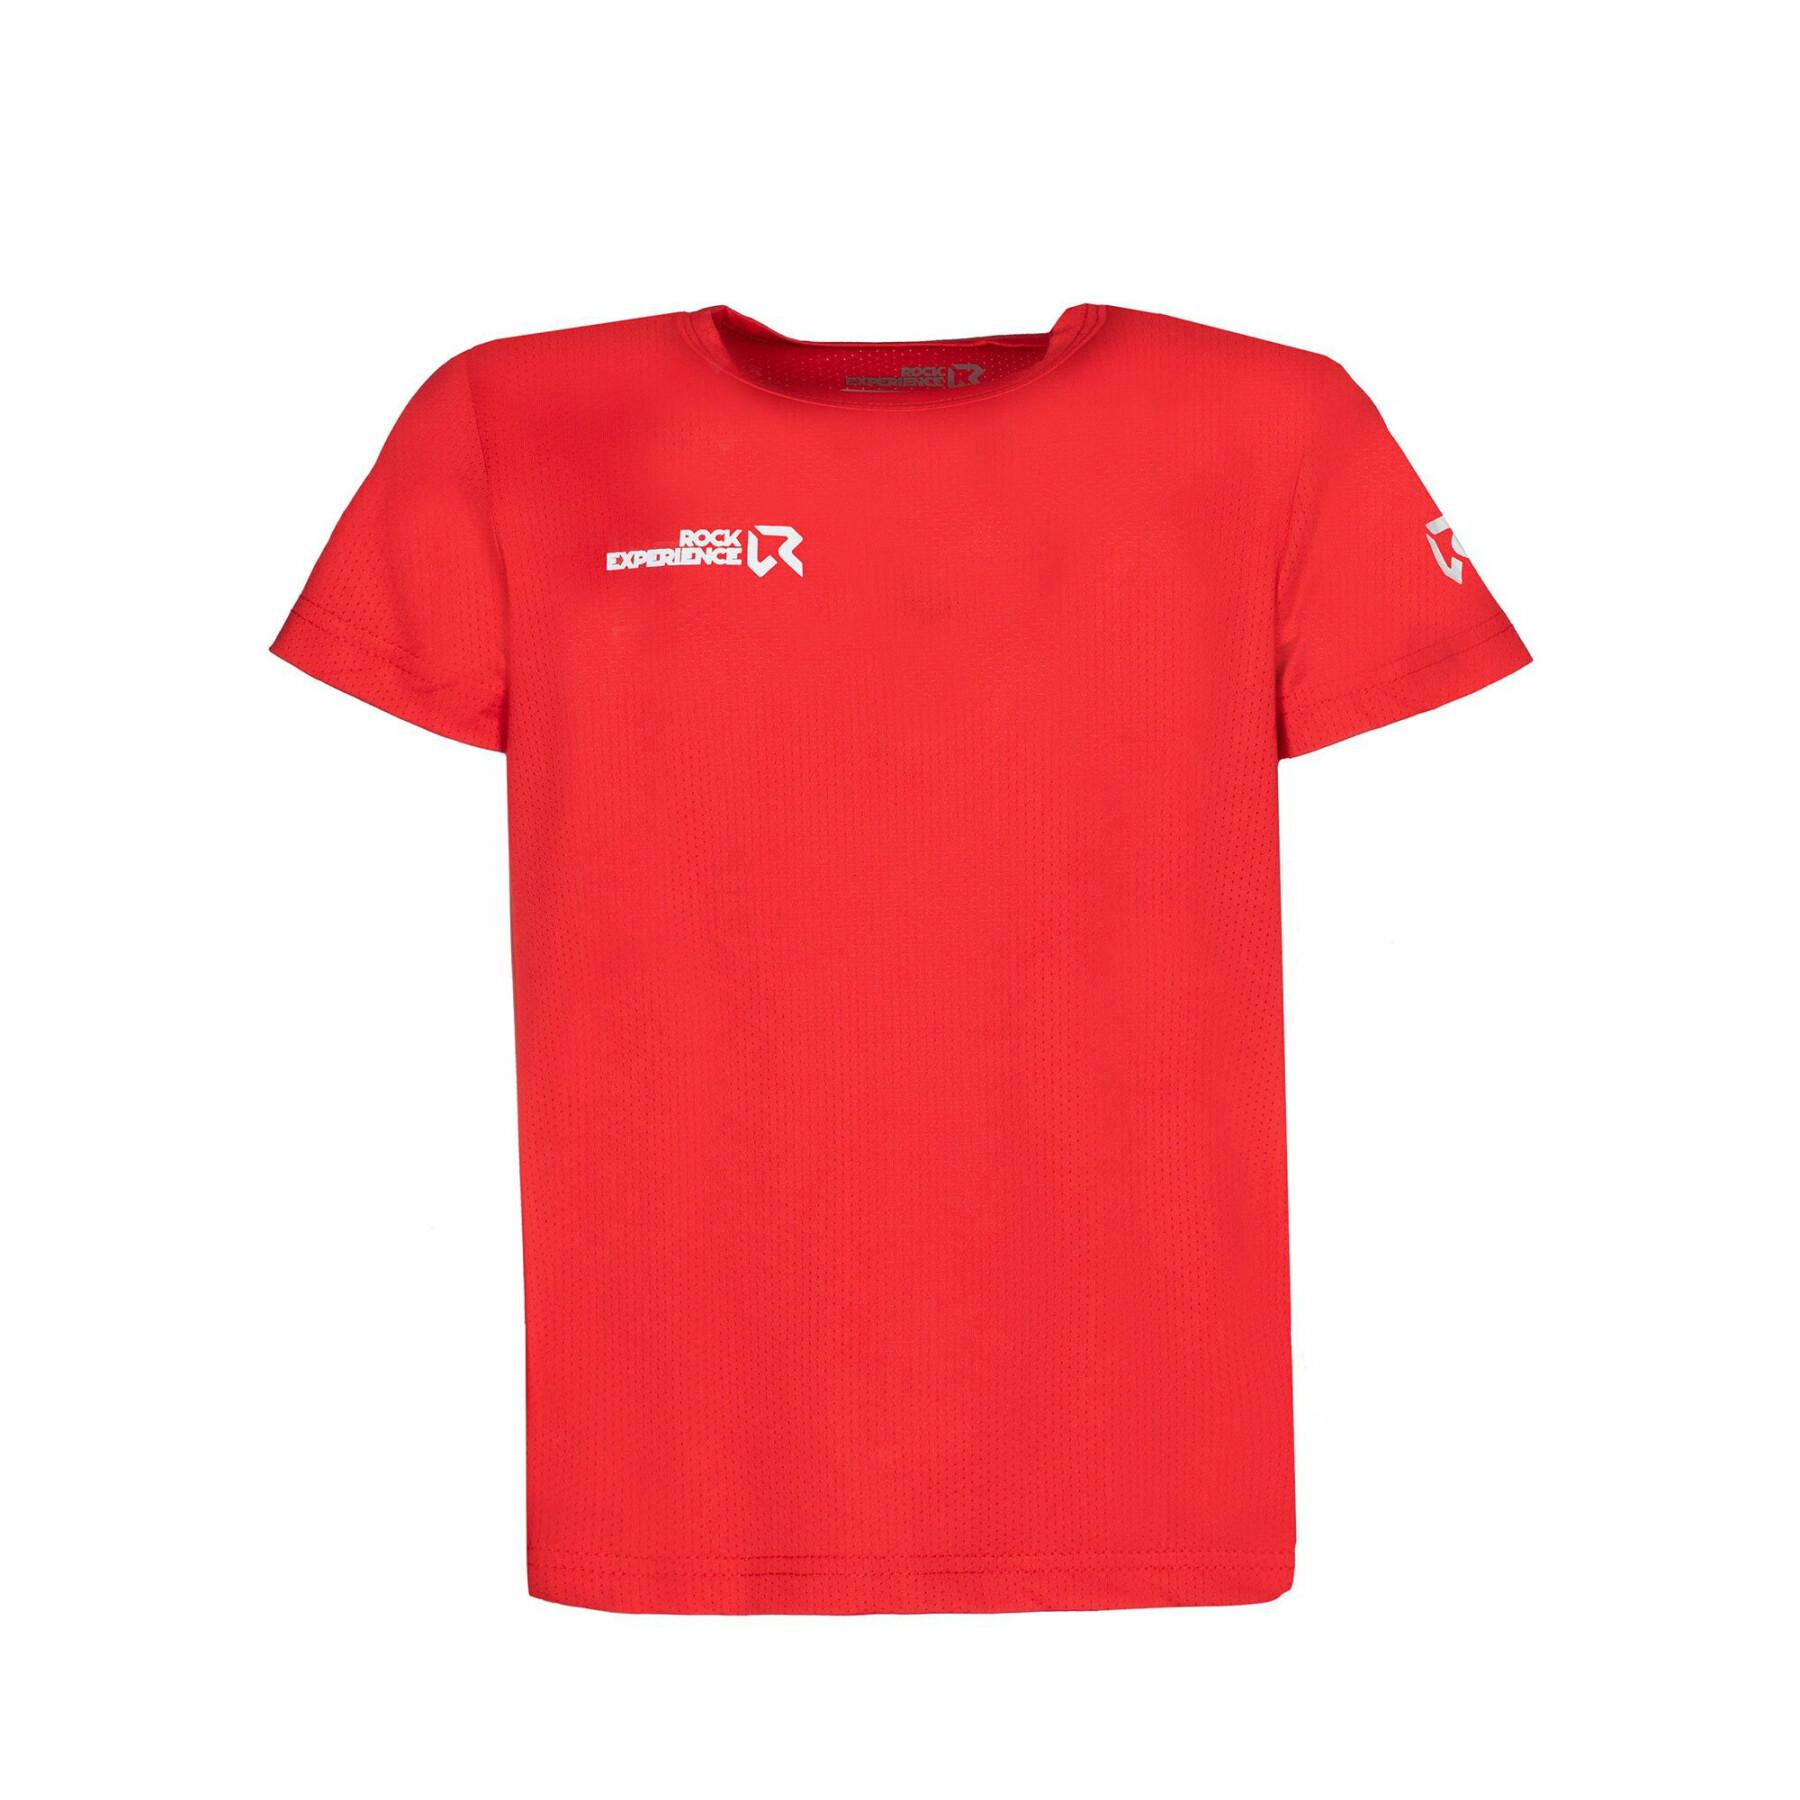 Kinder T-shirt Rock Experience Ambition